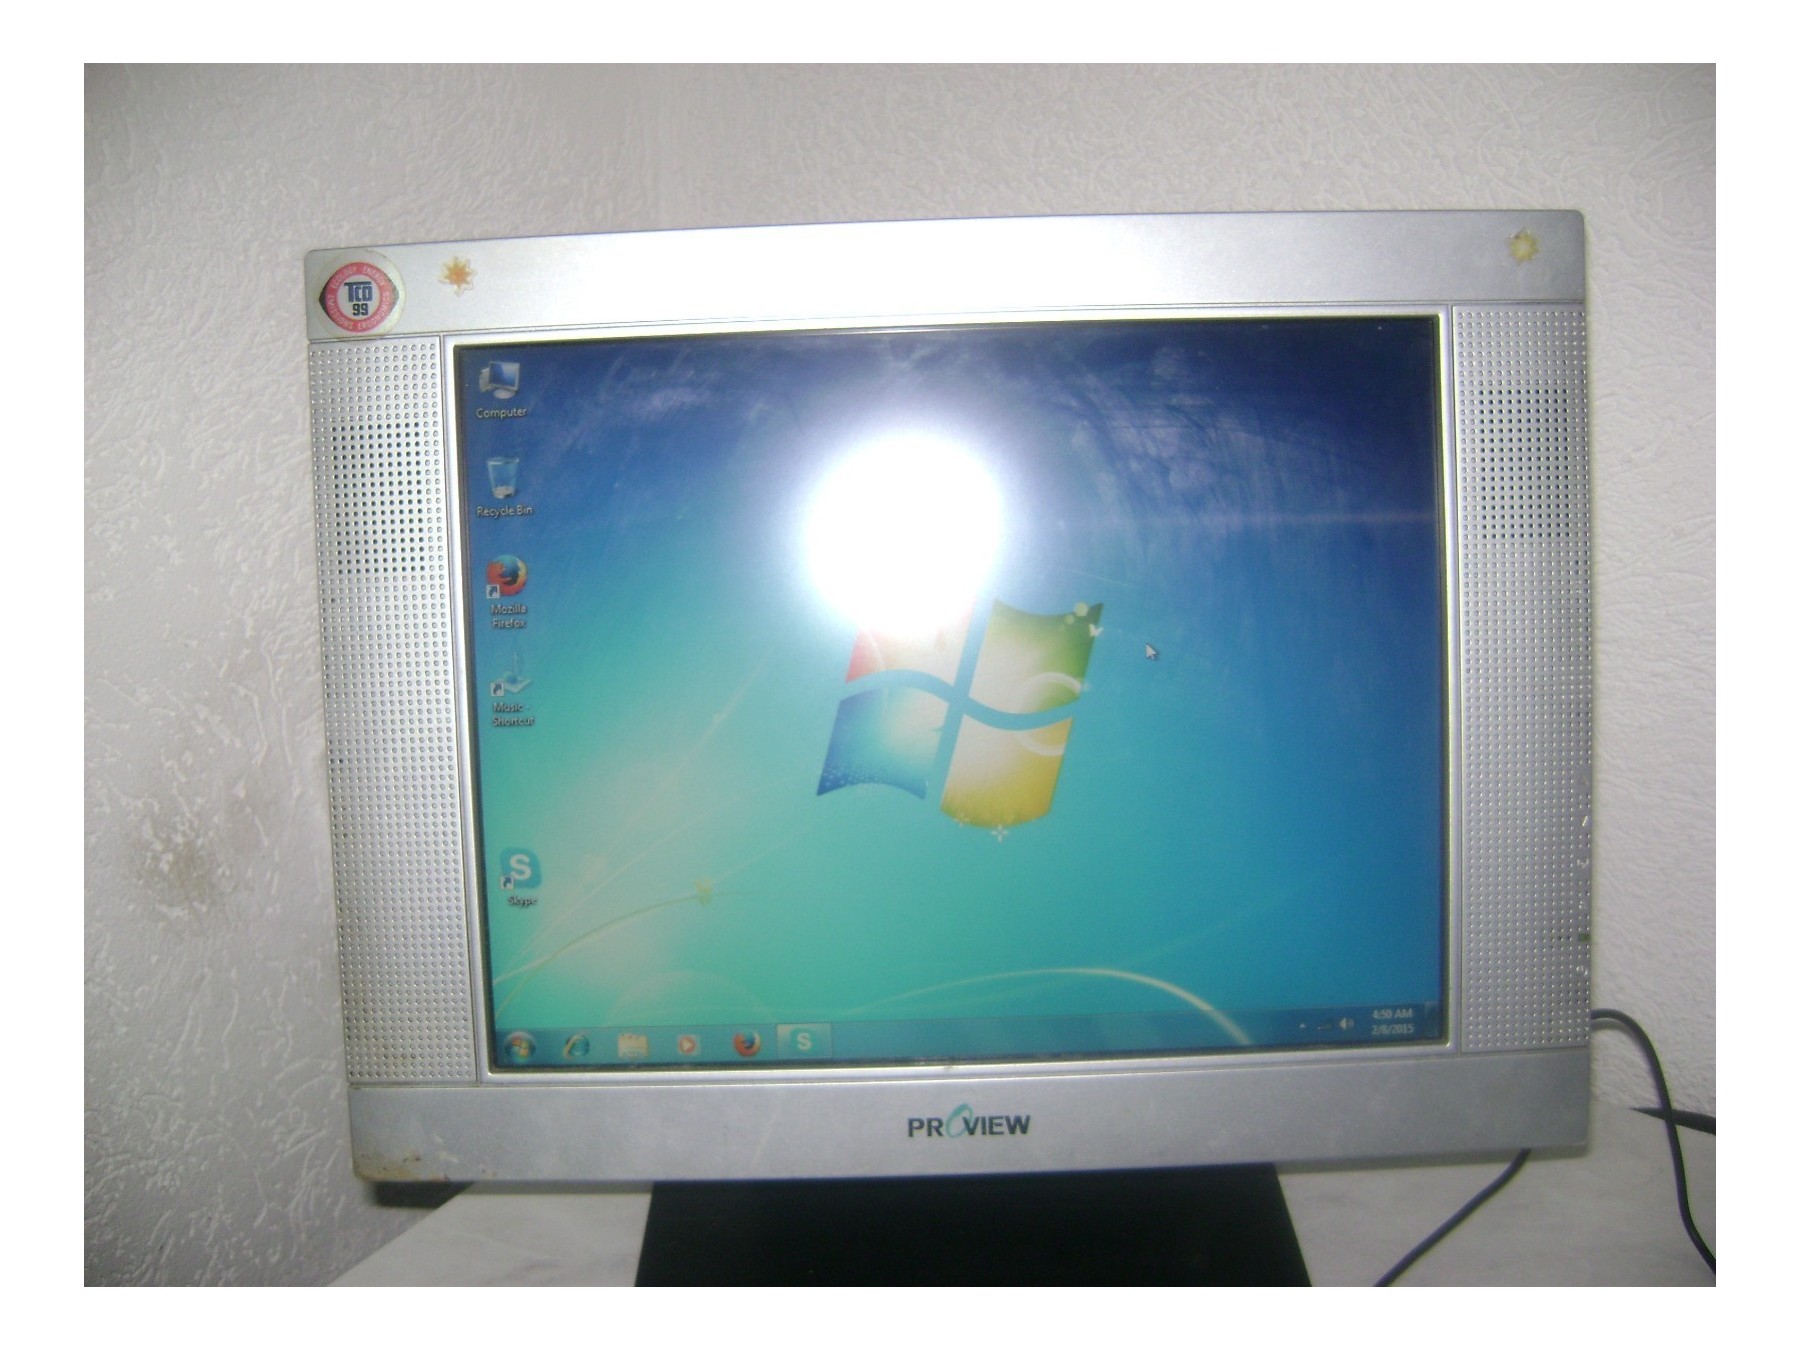 Proview monitor 700p driver download